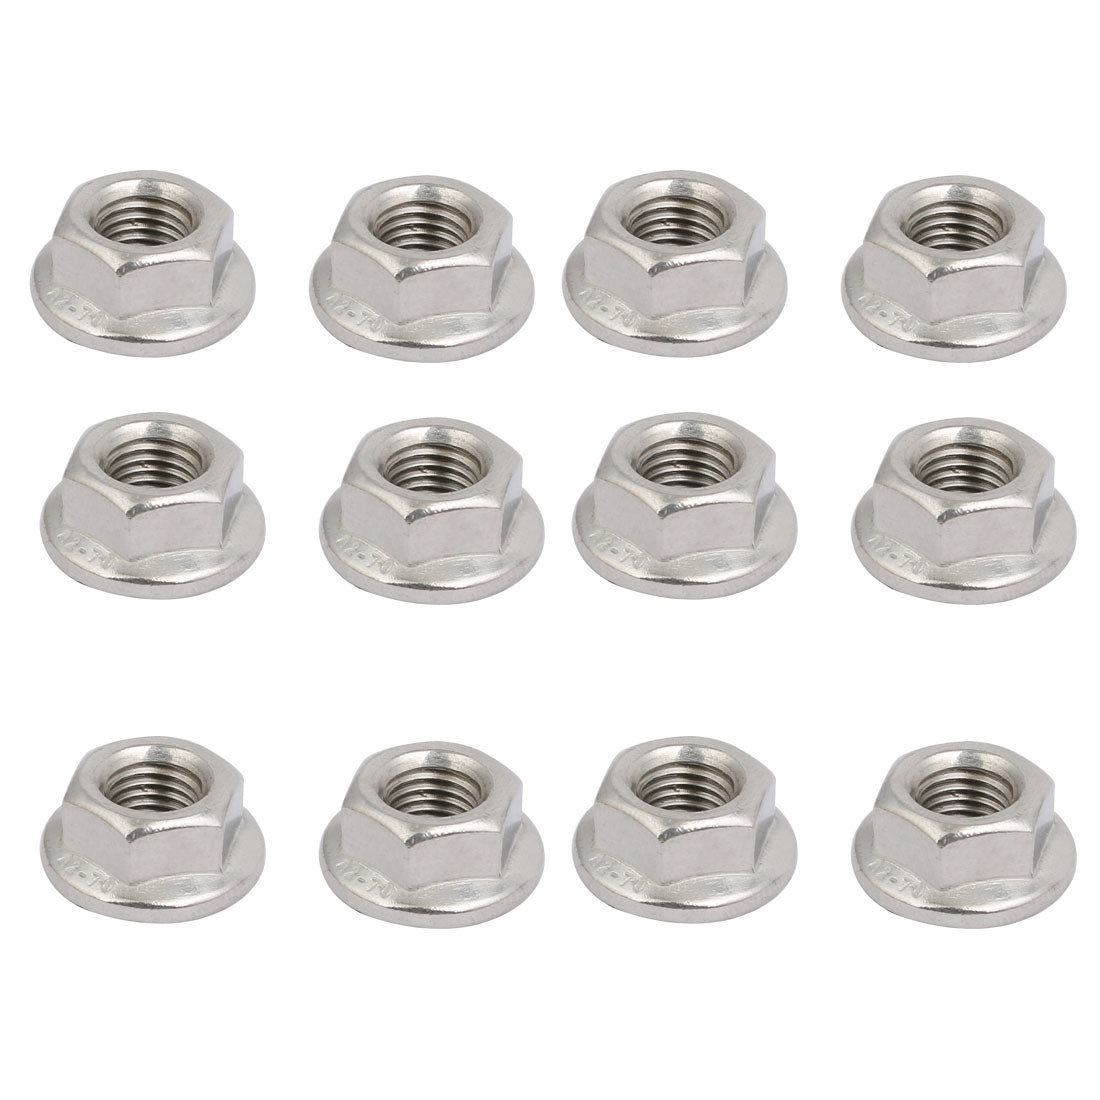 uxcell Uxcell 12pcs M8 x 1mm Pitch Metric Fine Thread 304 Stainless Steel Hex Flange Nut